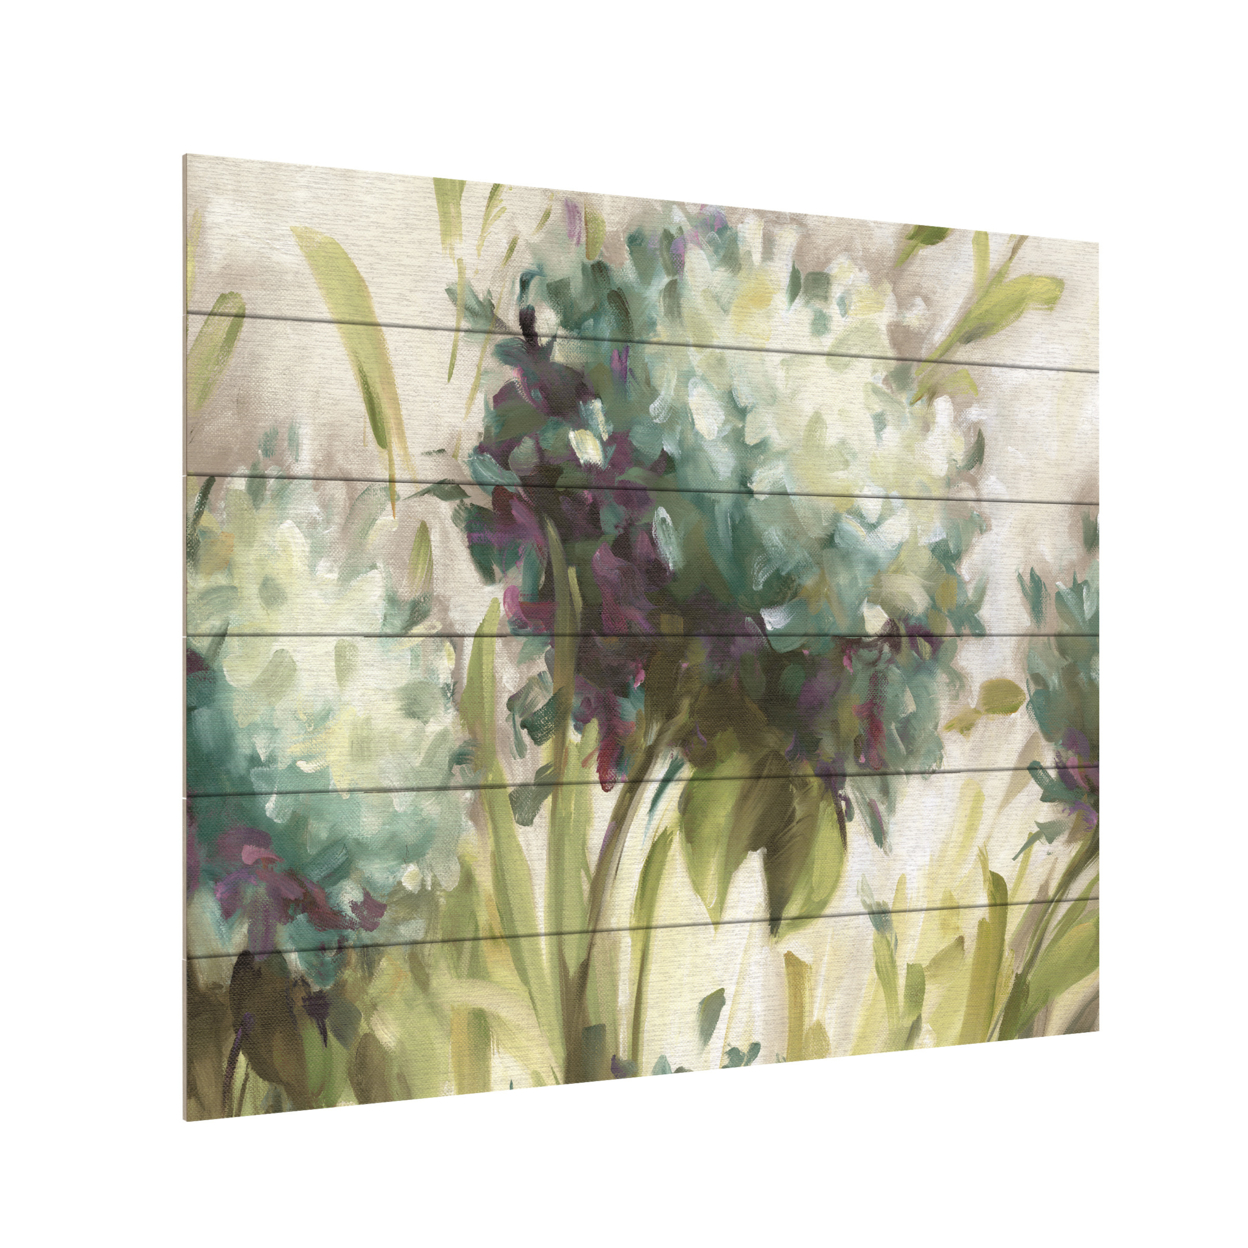 Wooden Slat Art 18 X 22 Inches Titled Hydrangea Field Ready To Hang Home Decor Picture